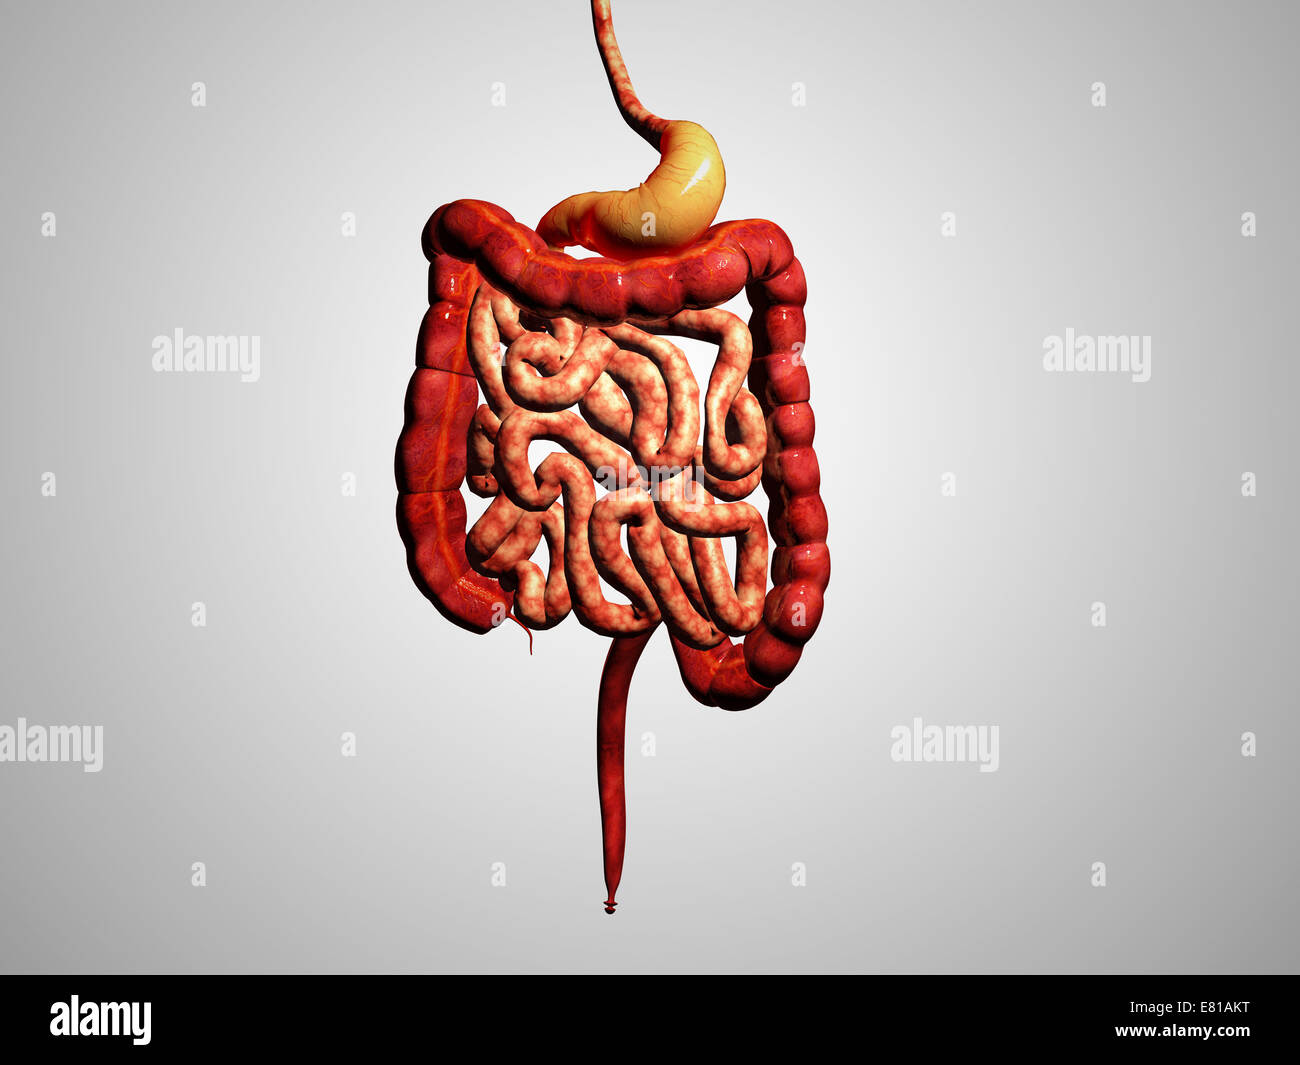 Front view of human digestive system Stock Photo - Alamy